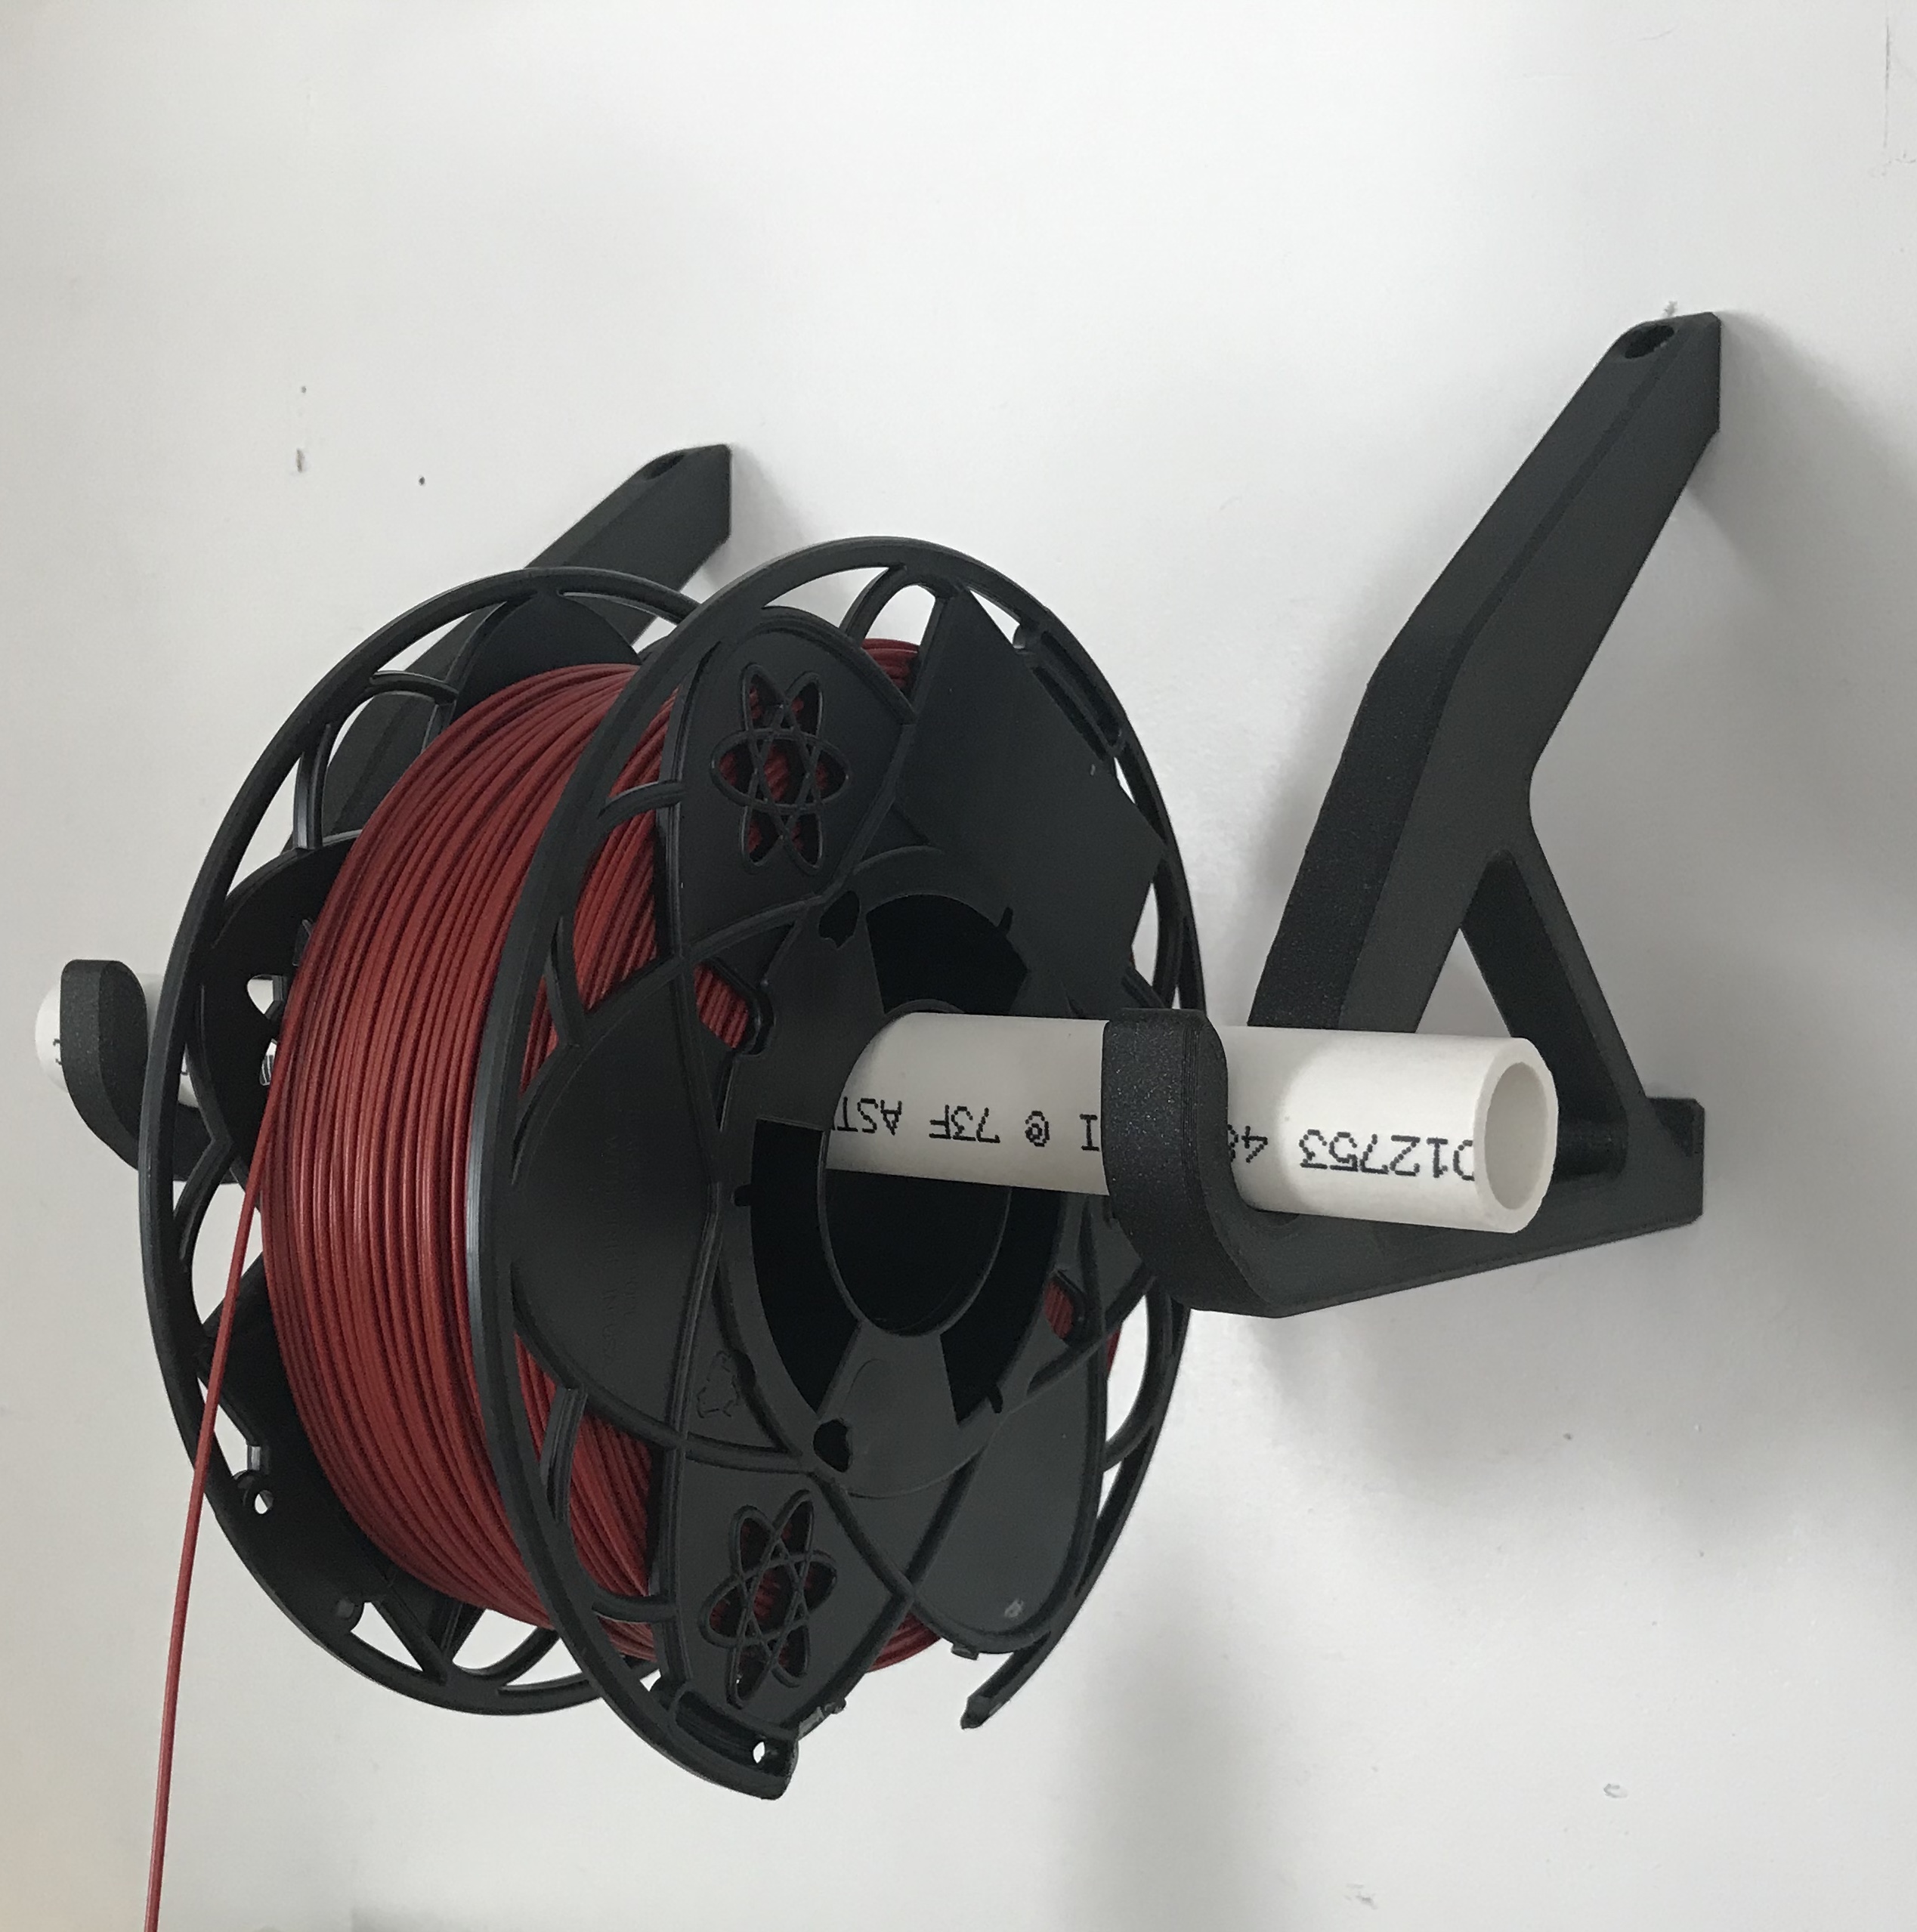 Filament Spool Holder Wall Rack Brackets for 3/4" PVC Pipe